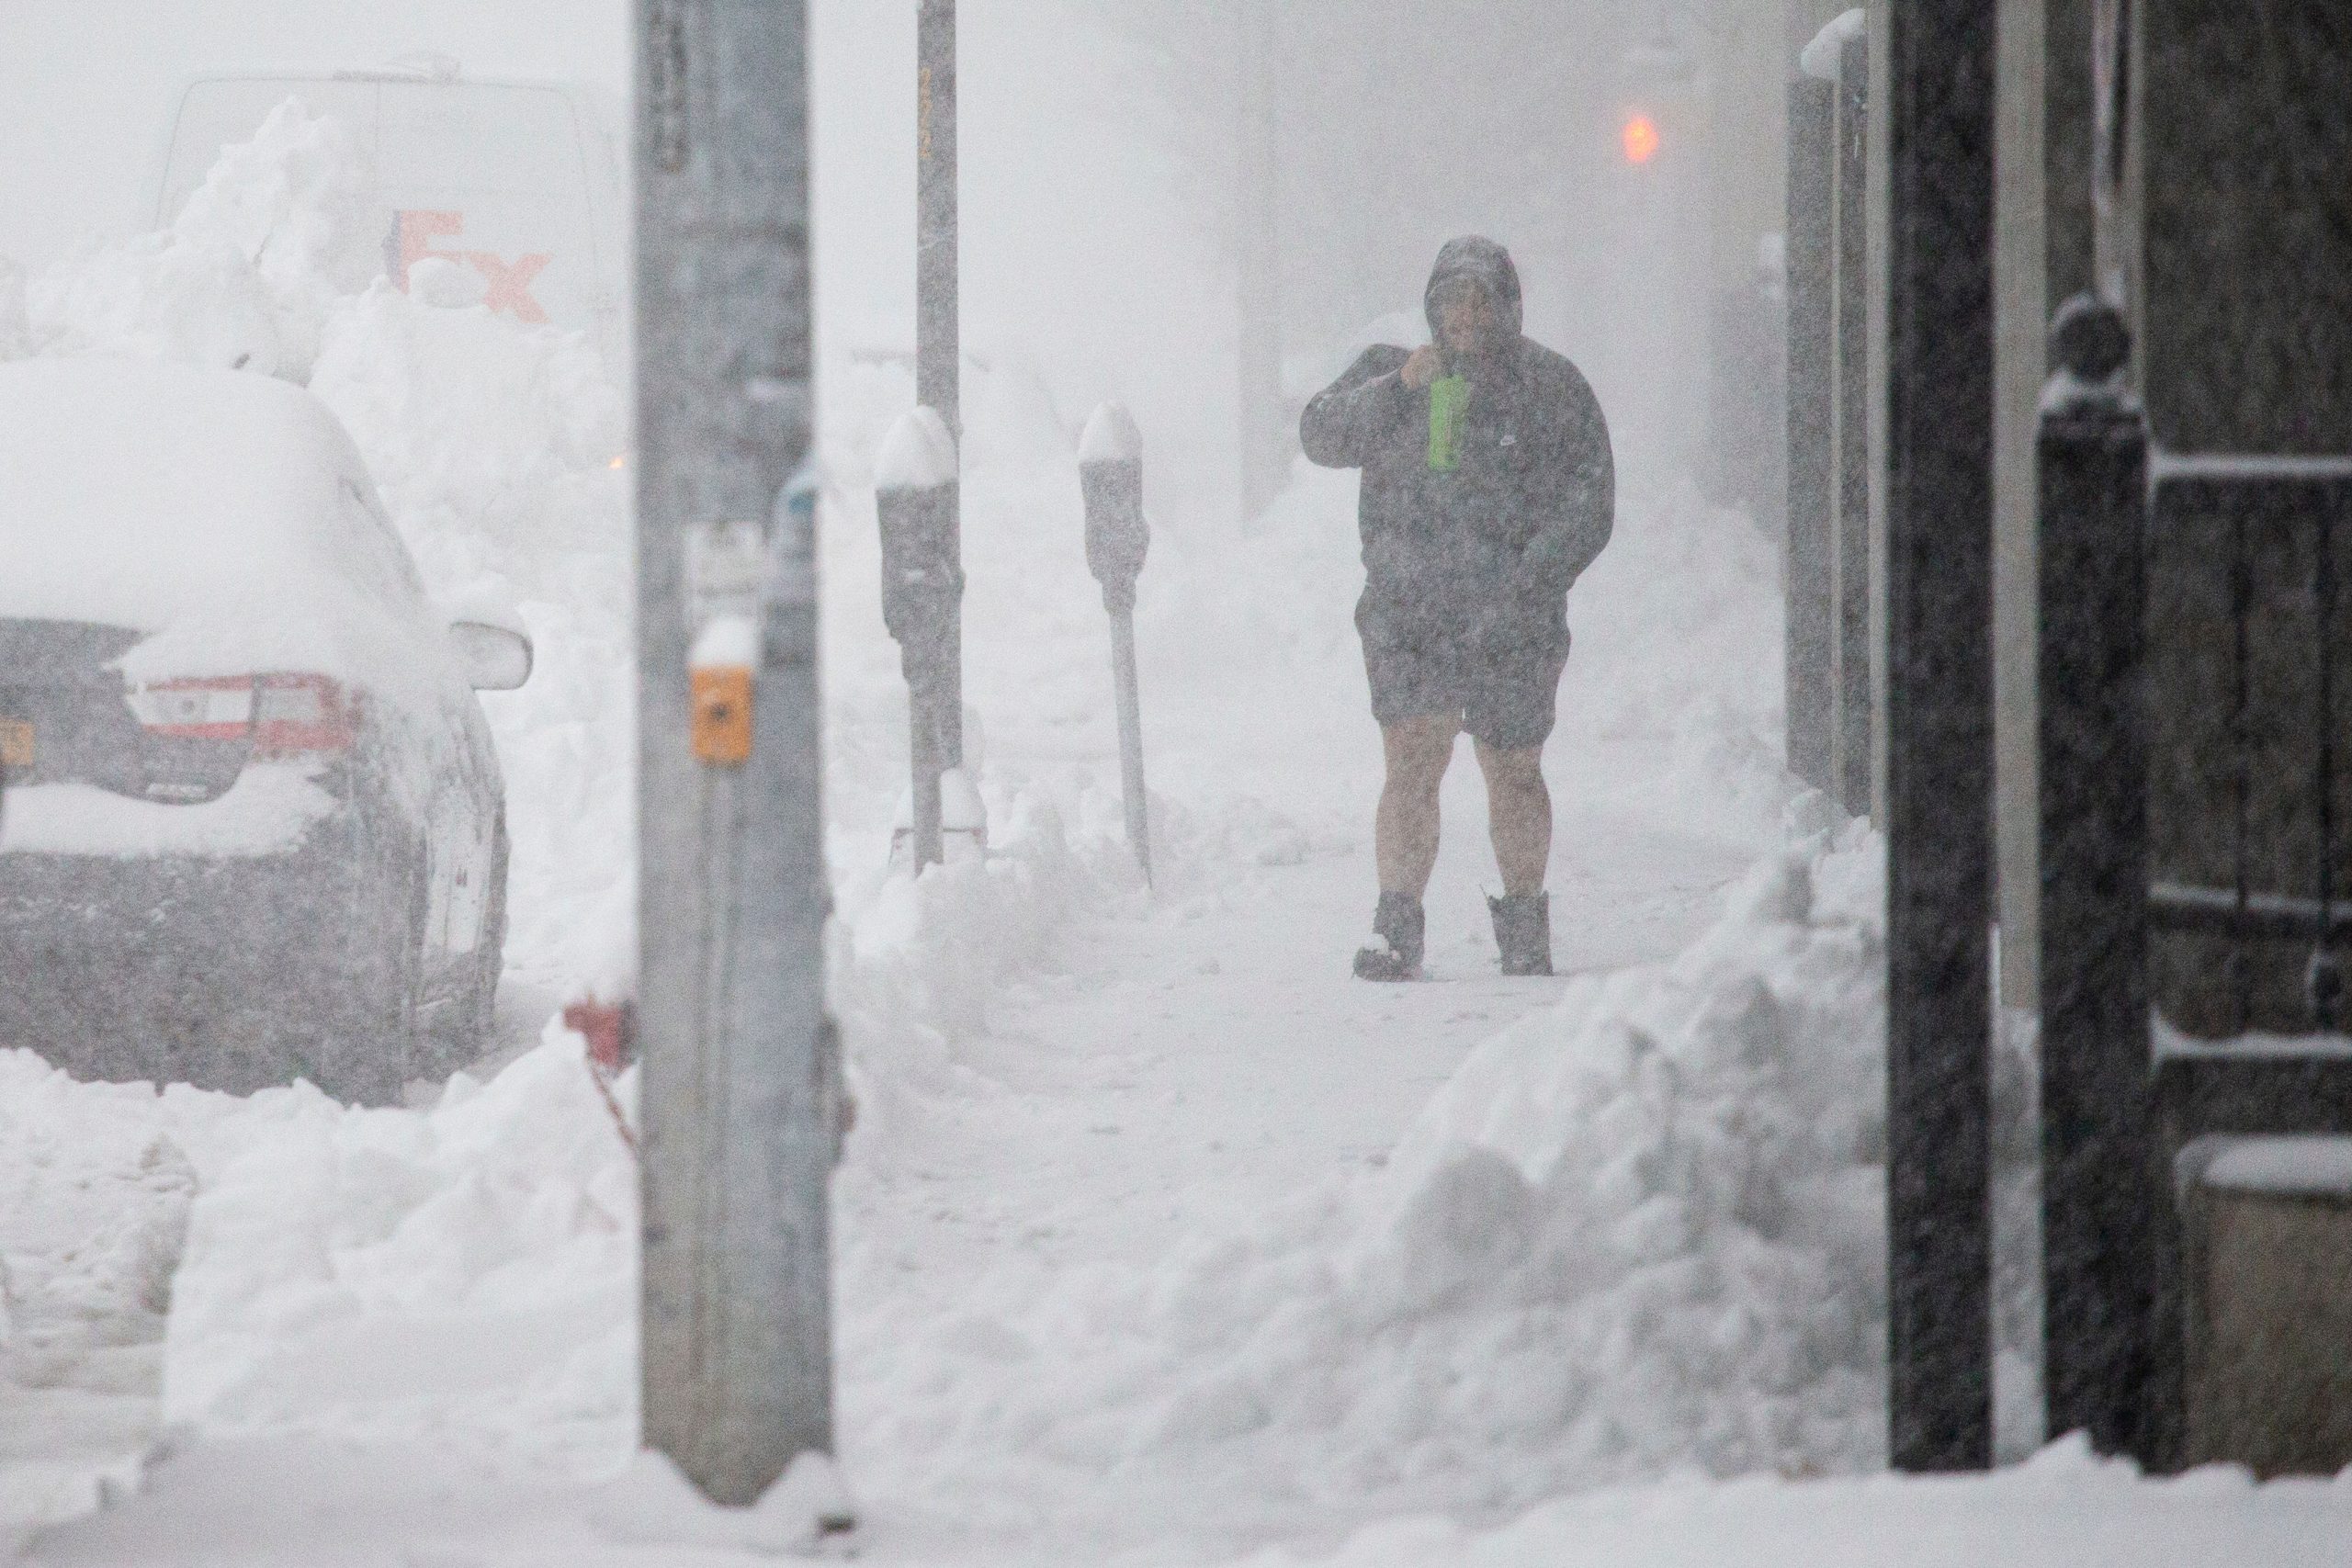 New York lake-effect snow: Potentially historic, dangerous storm wallops north of state